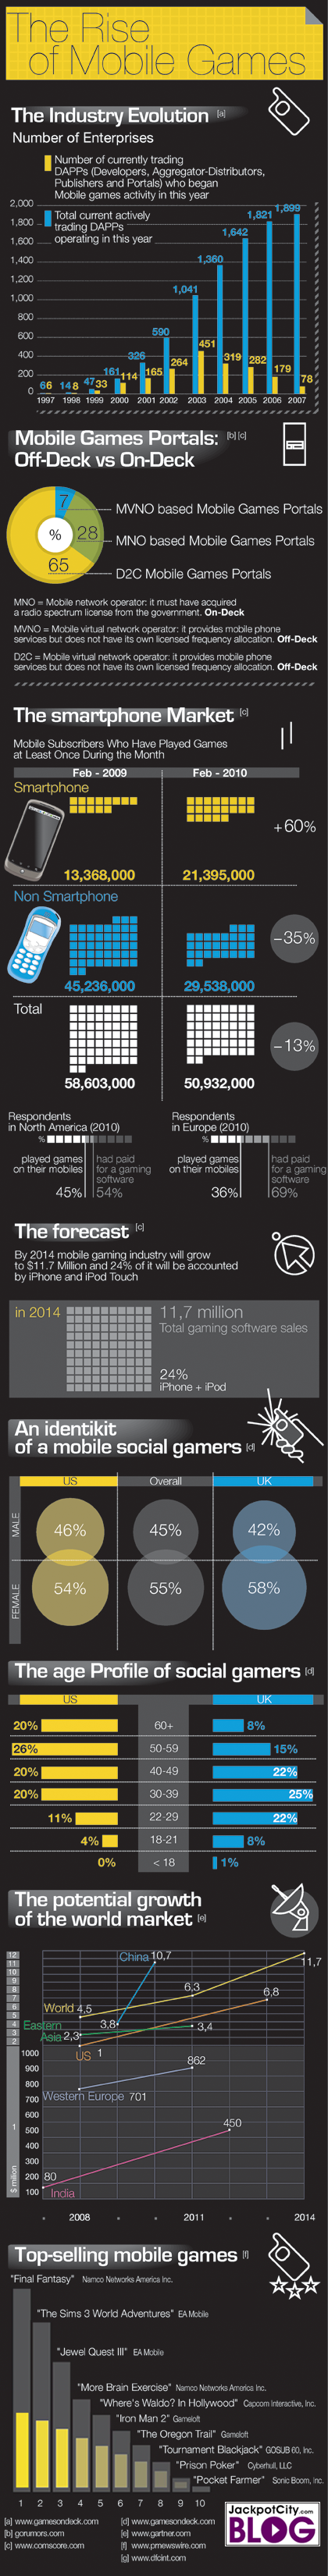 Rise of Mobile Games